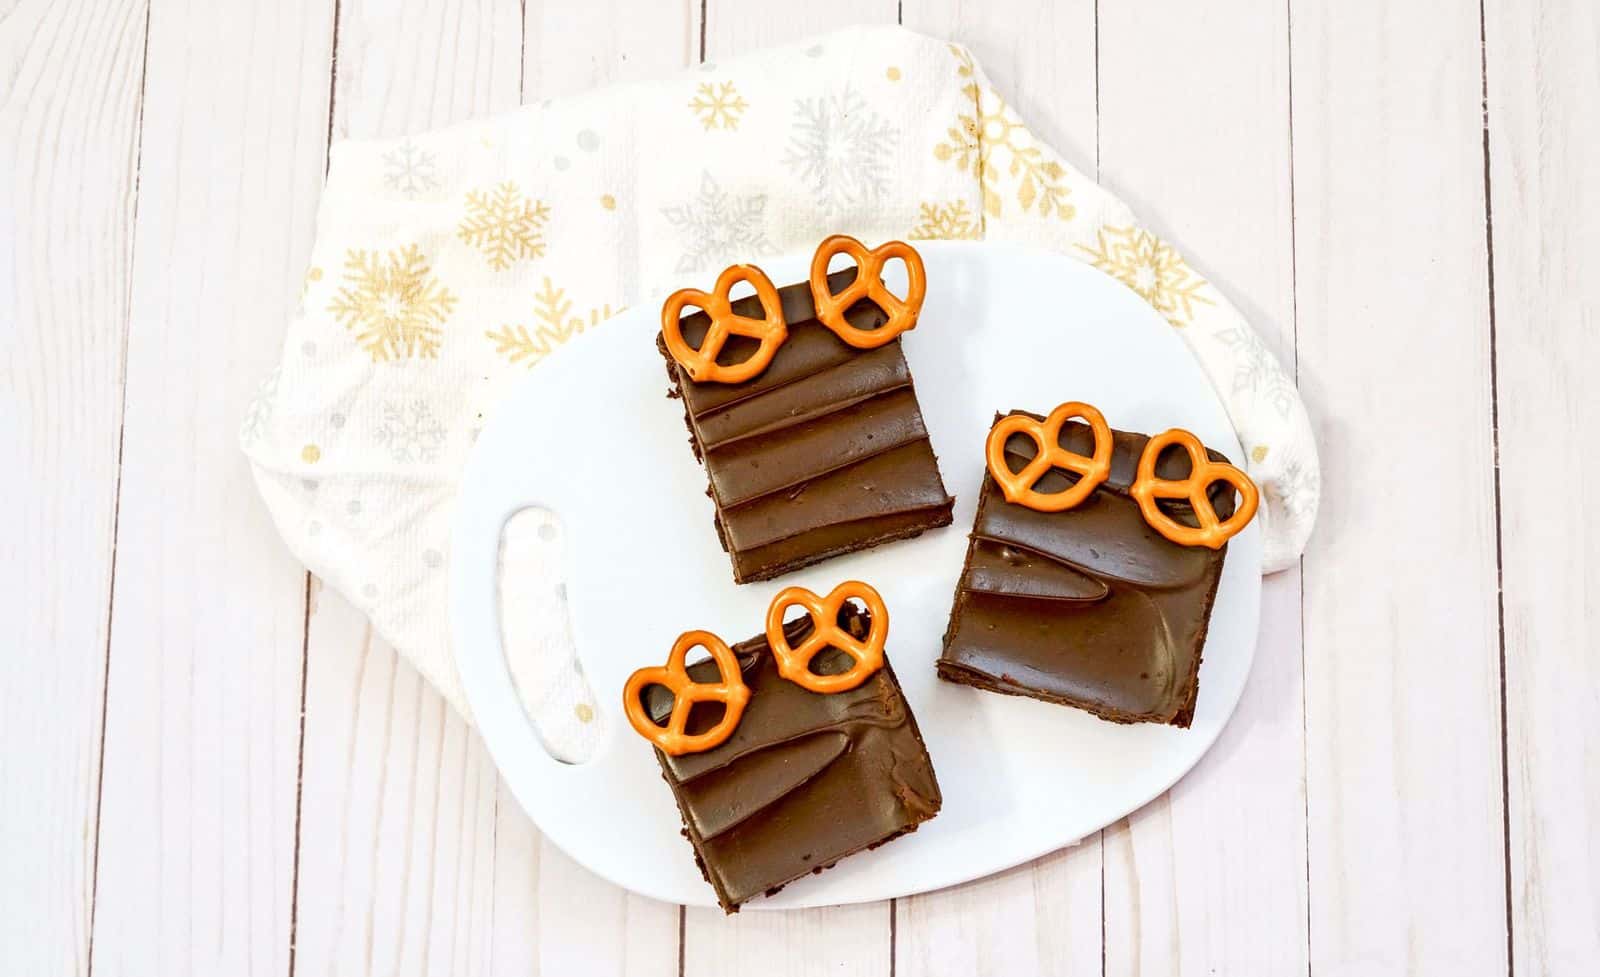 The simple Rudolph brownies easy DIY Christmas treats! Store-bought brownies make it a breeze and CHEAP, too! My kids will love making these cuties!